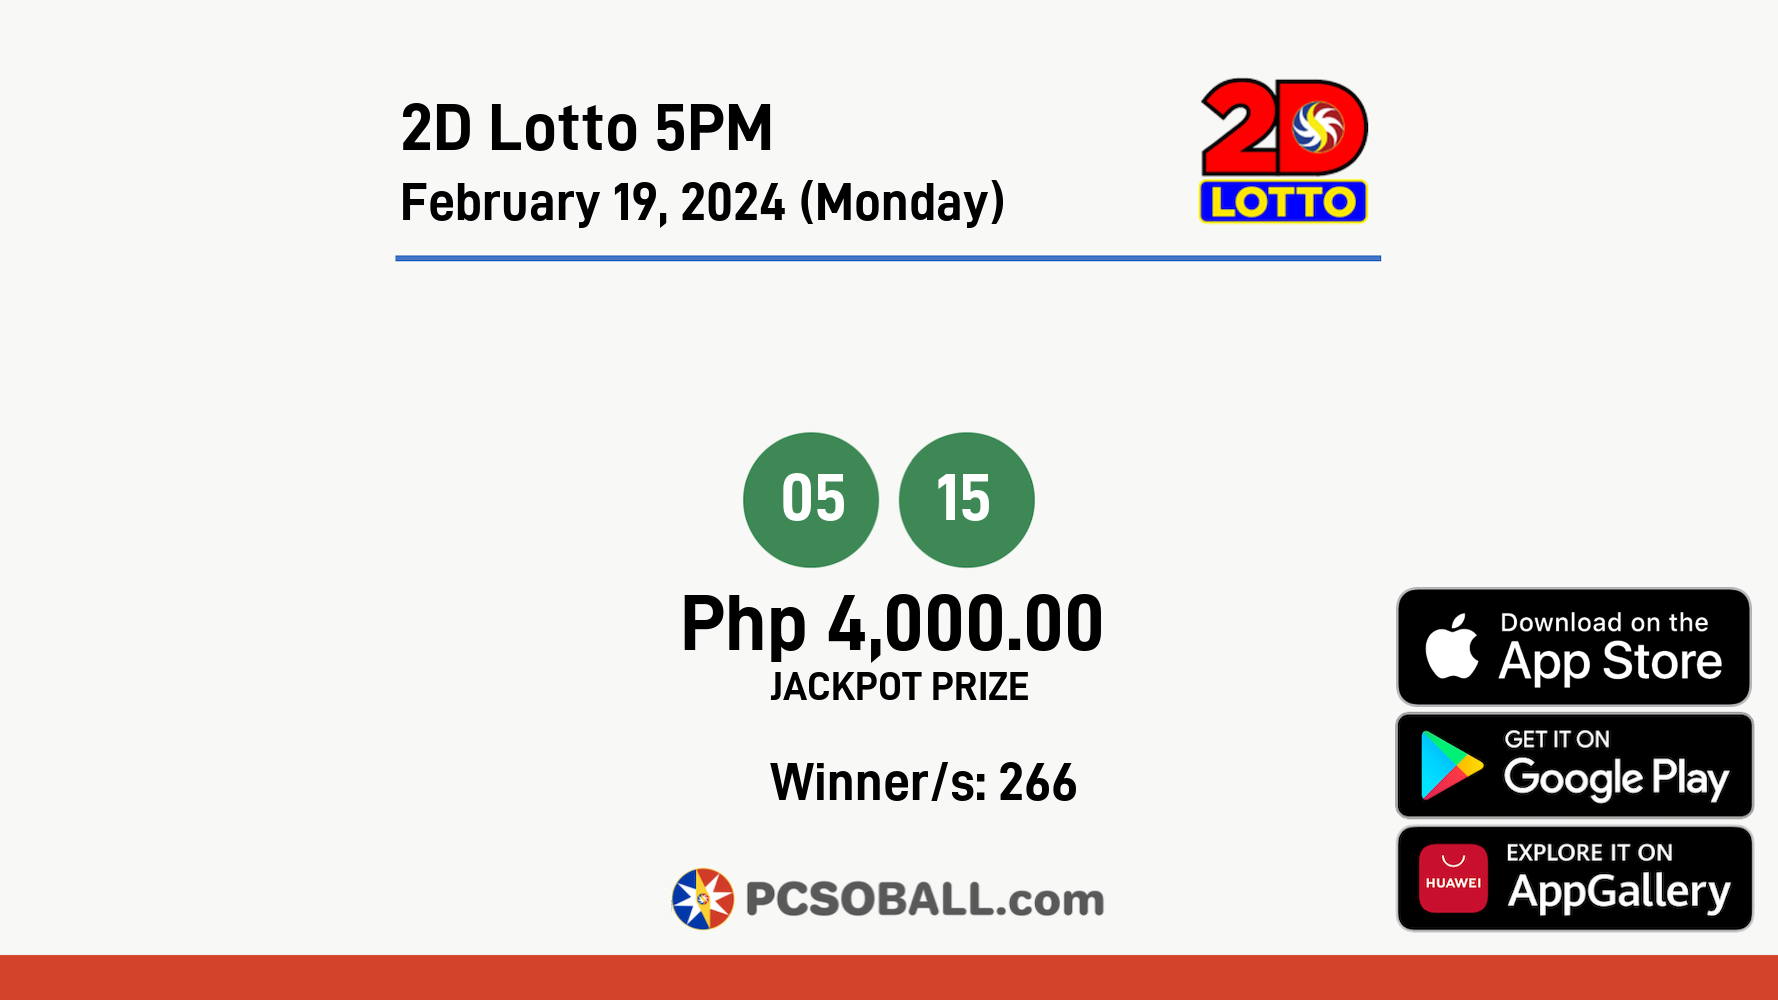 2D Lotto 5PM February 19, 2024 (Monday) Result